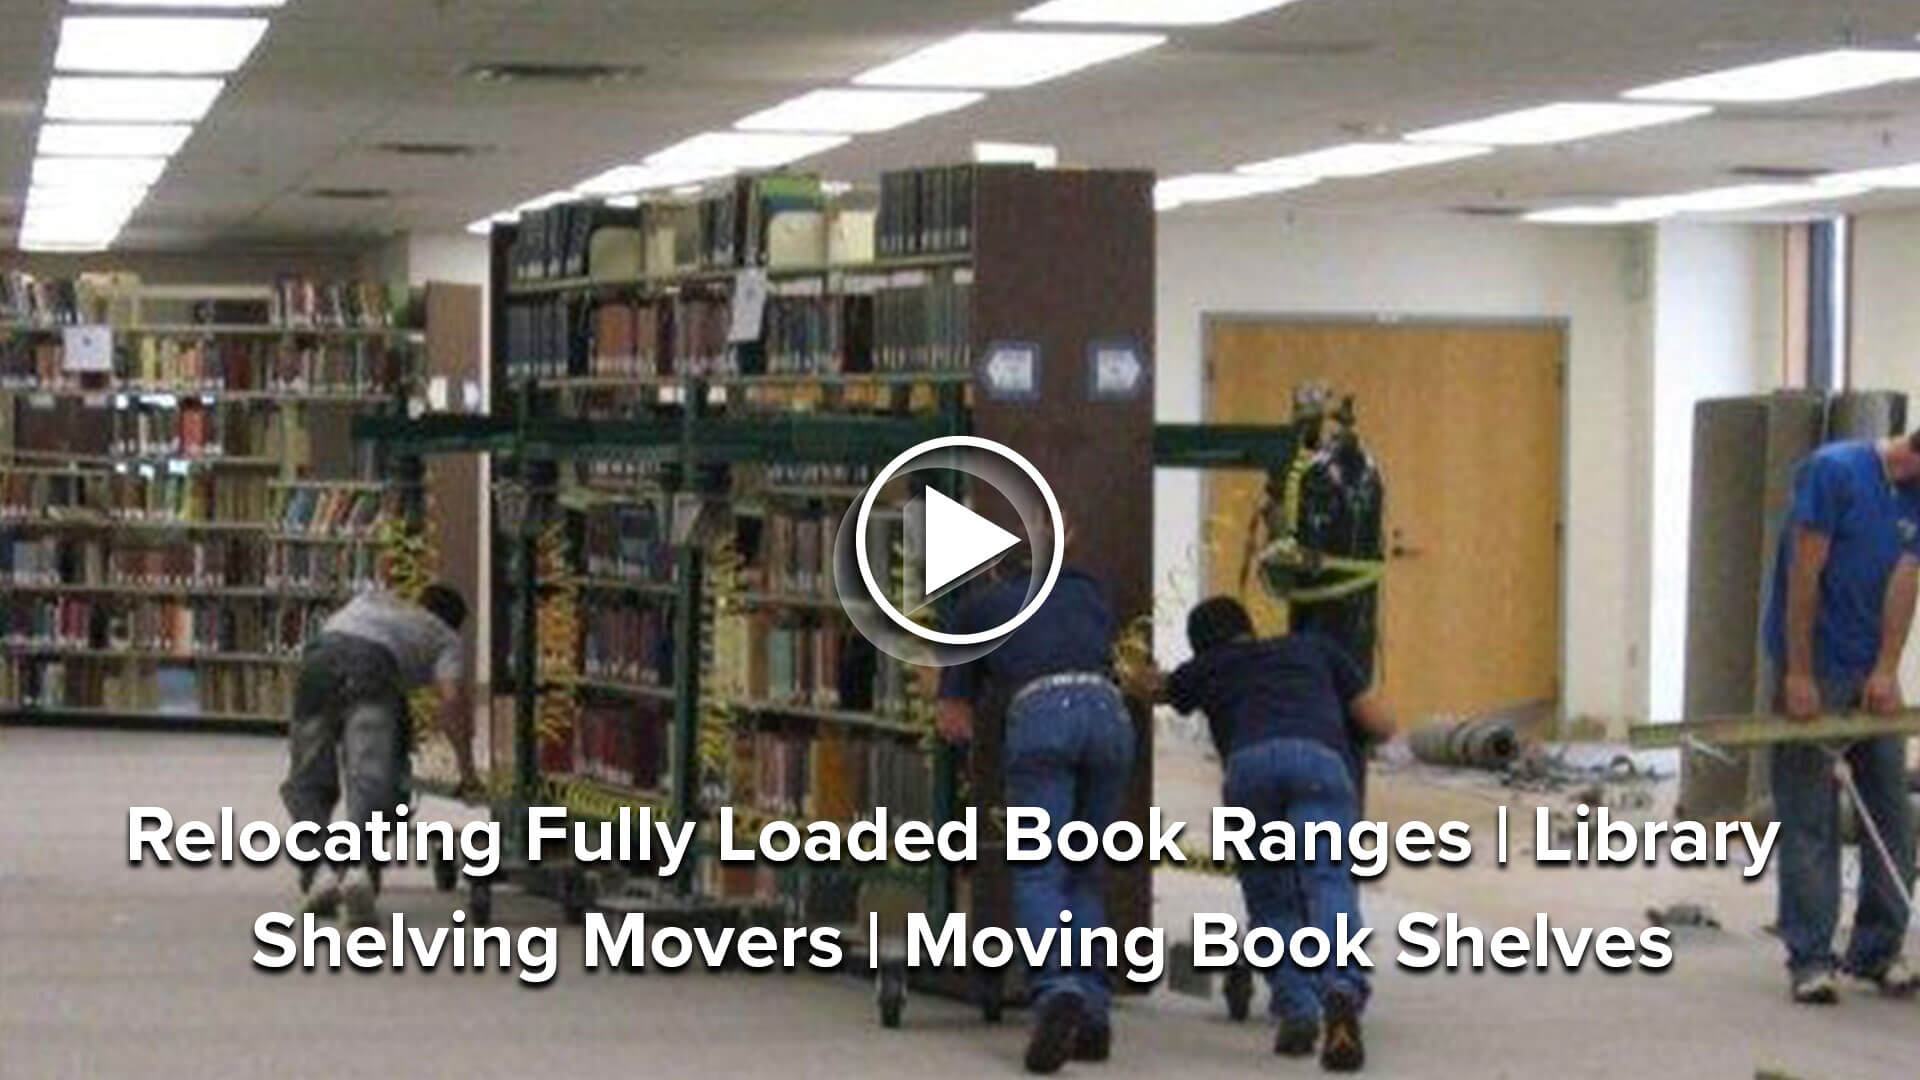 Relocating fully loaded book ranges library shelving movers moving book shelves poster 1